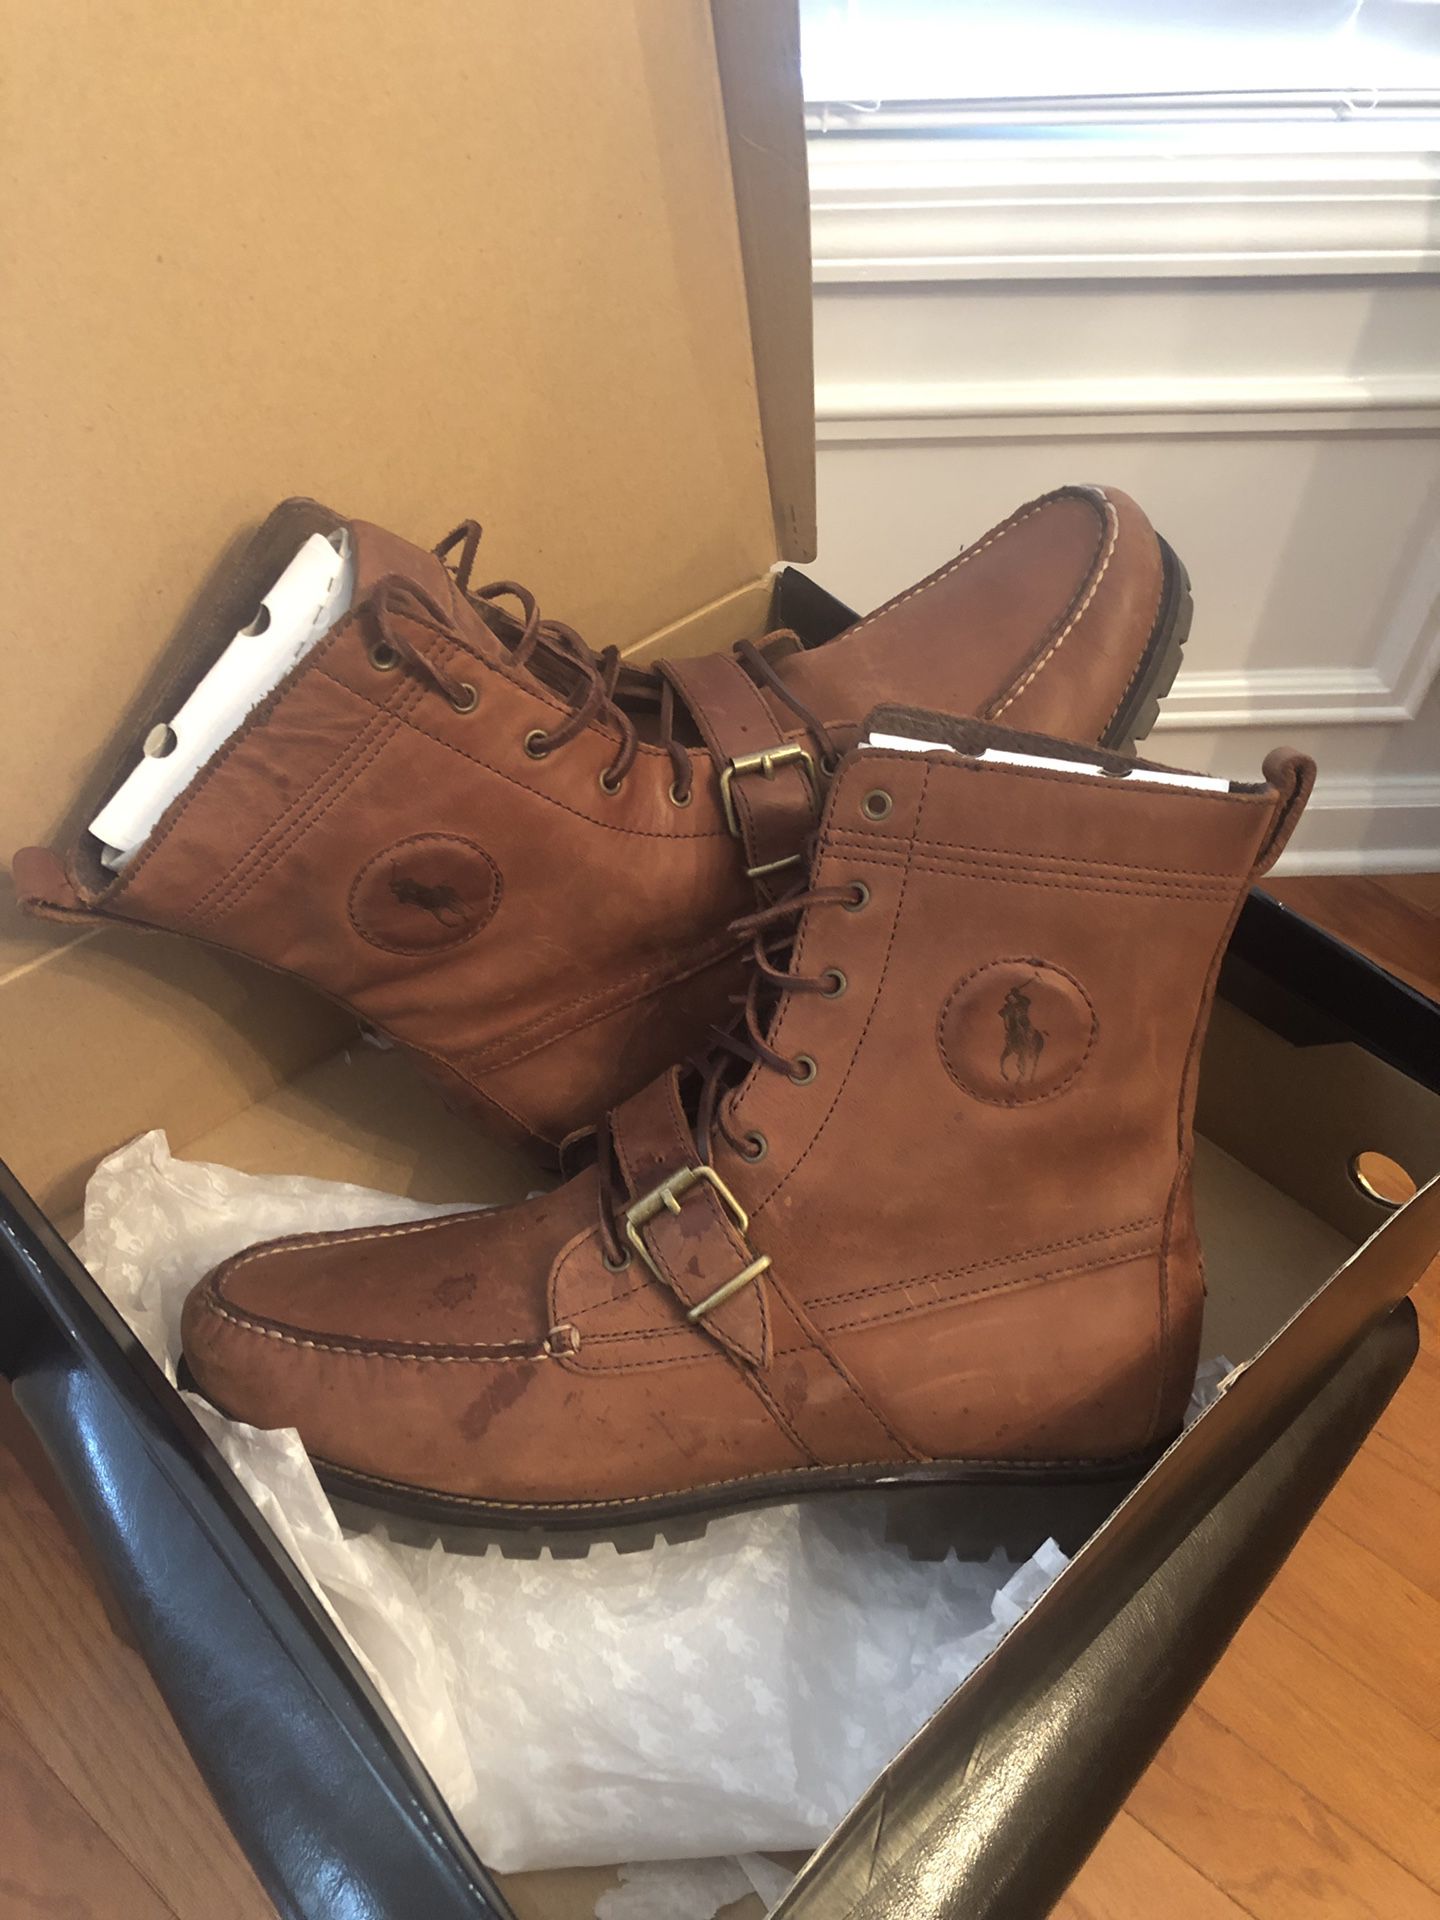 Ralph Lauren Polo Ranger Boots, Brown Nubuck Leather, Men's Size 13, GREAT  BOOTS for Sale in Norcross, GA - OfferUp